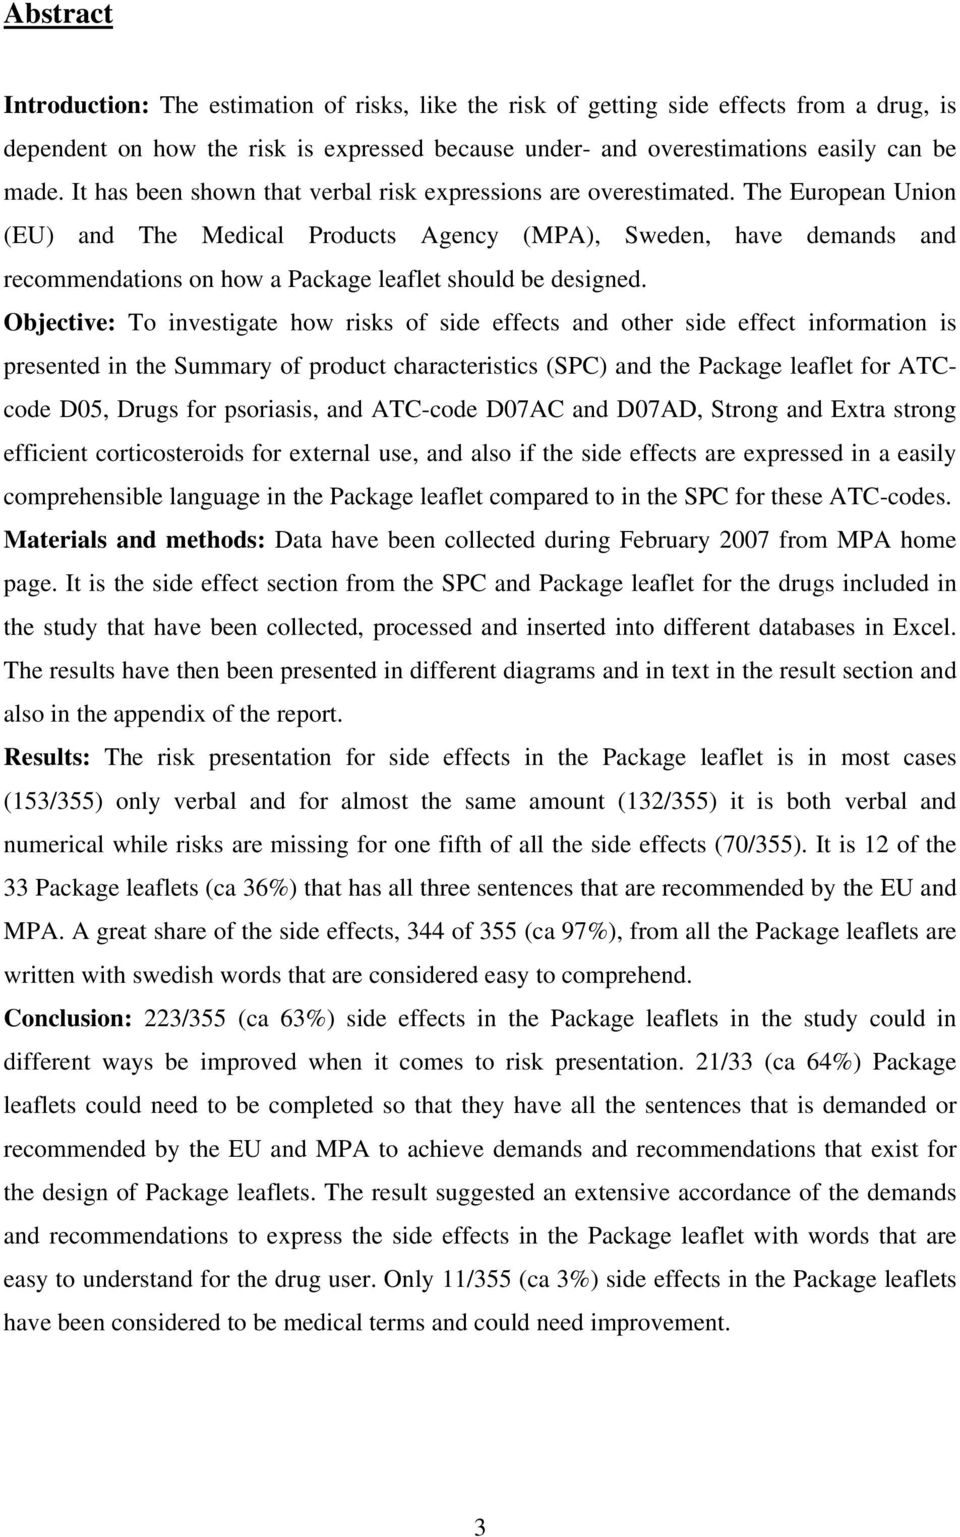 The European Union (EU) and The Medical Products Agency (MPA), Sweden, have demands and recommendations on how a Package leaflet should be designed.